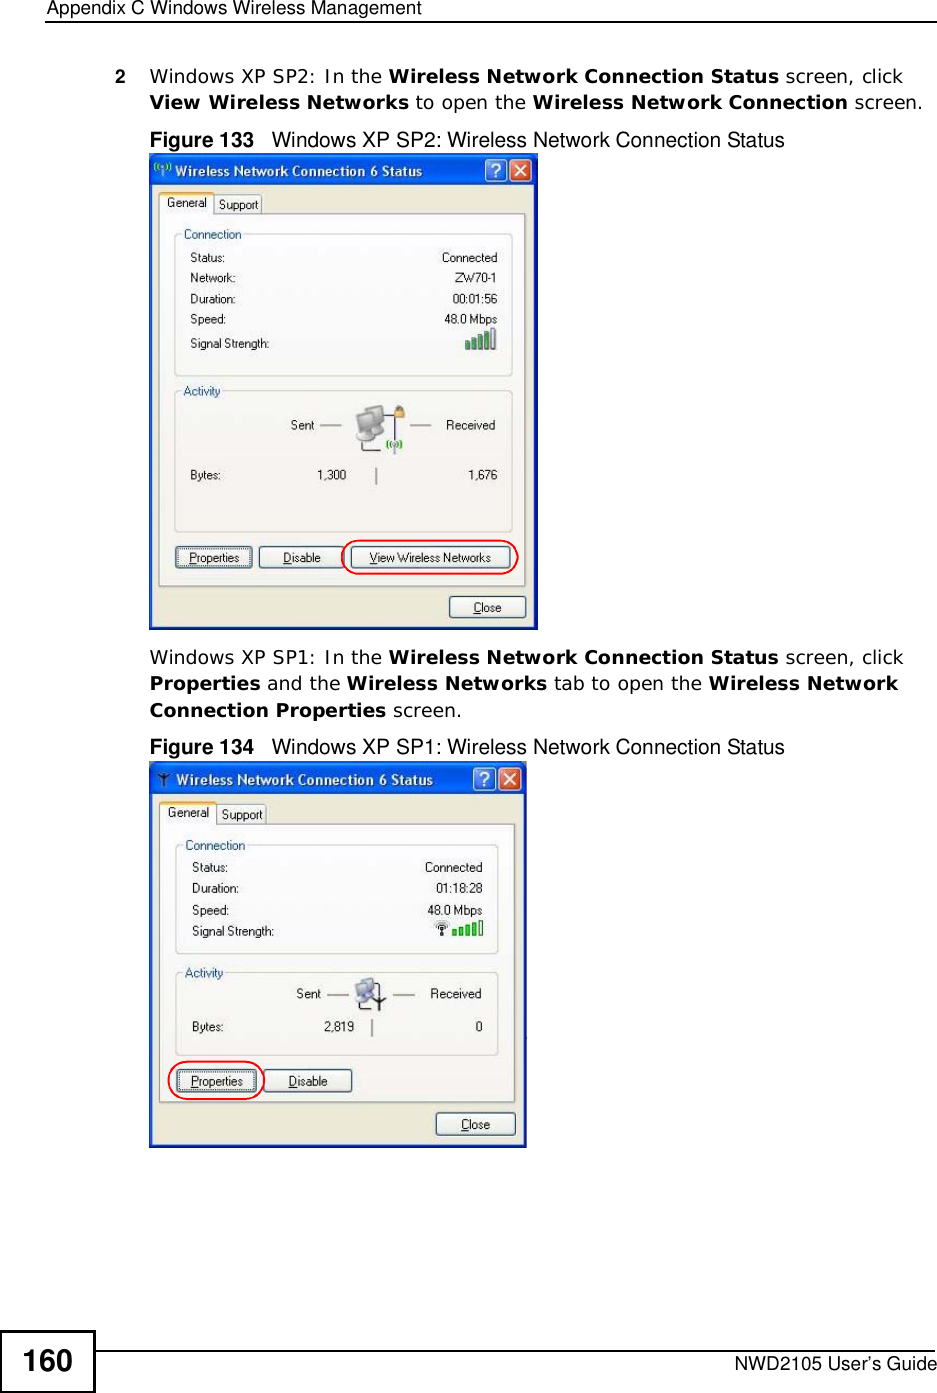 Appendix CWindows Wireless ManagementNWD2105 User’s Guide1602Windows XP SP2: In the Wireless Network Connection Status screen, click View Wireless Networks to open the Wireless Network Connection screen.Figure 133   Windows XP SP2: Wireless Network Connection StatusWindows XP SP1: In the Wireless Network Connection Status screen, click Properties and the Wireless Networks tab to open the Wireless Network Connection Properties screen.Figure 134   Windows XP SP1: Wireless Network Connection Status